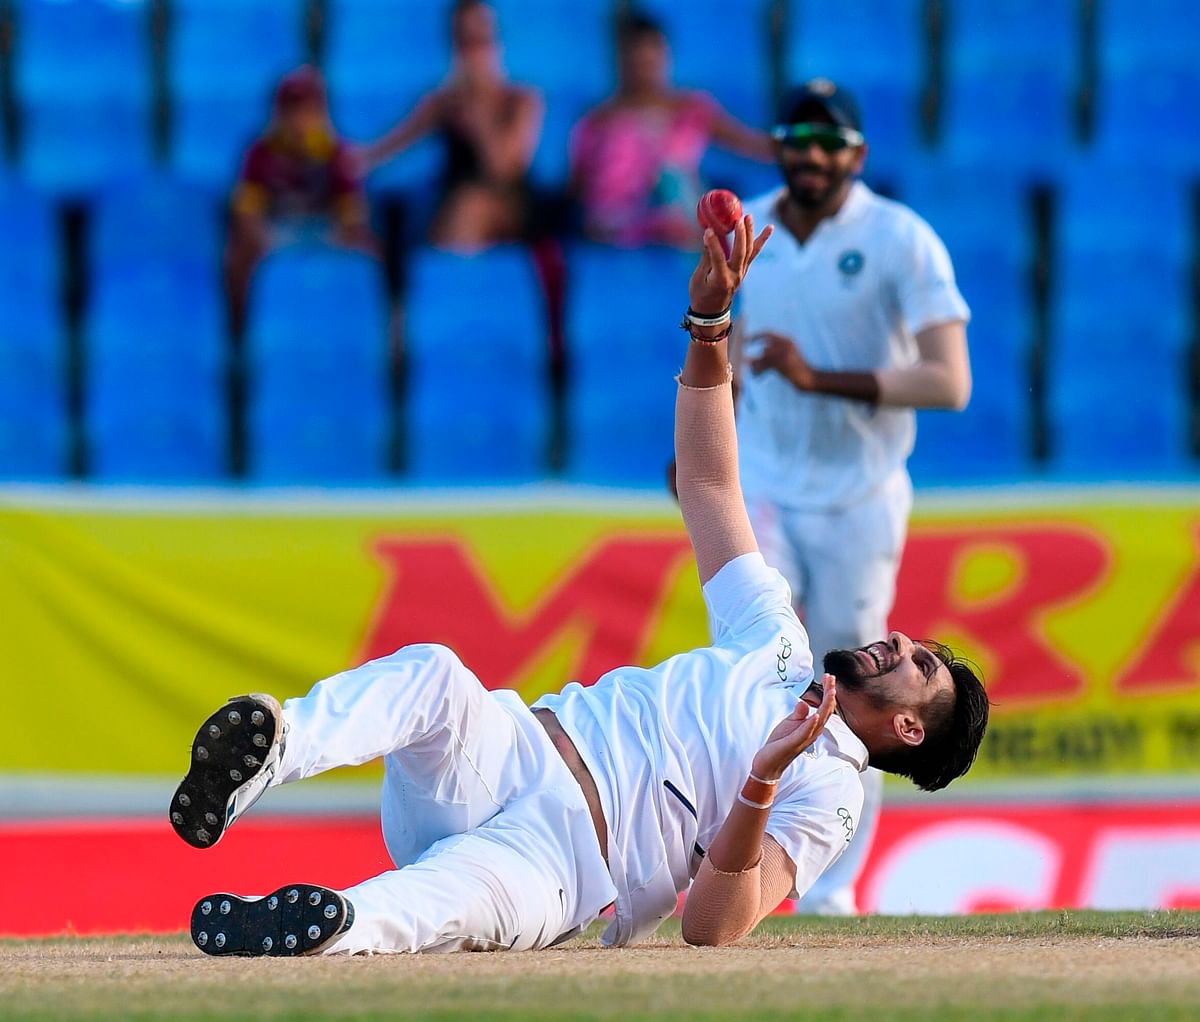 Ishant Sharma of India celebrates the dismissal of Shimron Hetmyer of West Indies during day 2 of the 1st Test between West Indies and India at Vivian Richards Cricket Stadium in North Sound, Antigua and Barbuda, on 23 August 2019. Photo: AFP